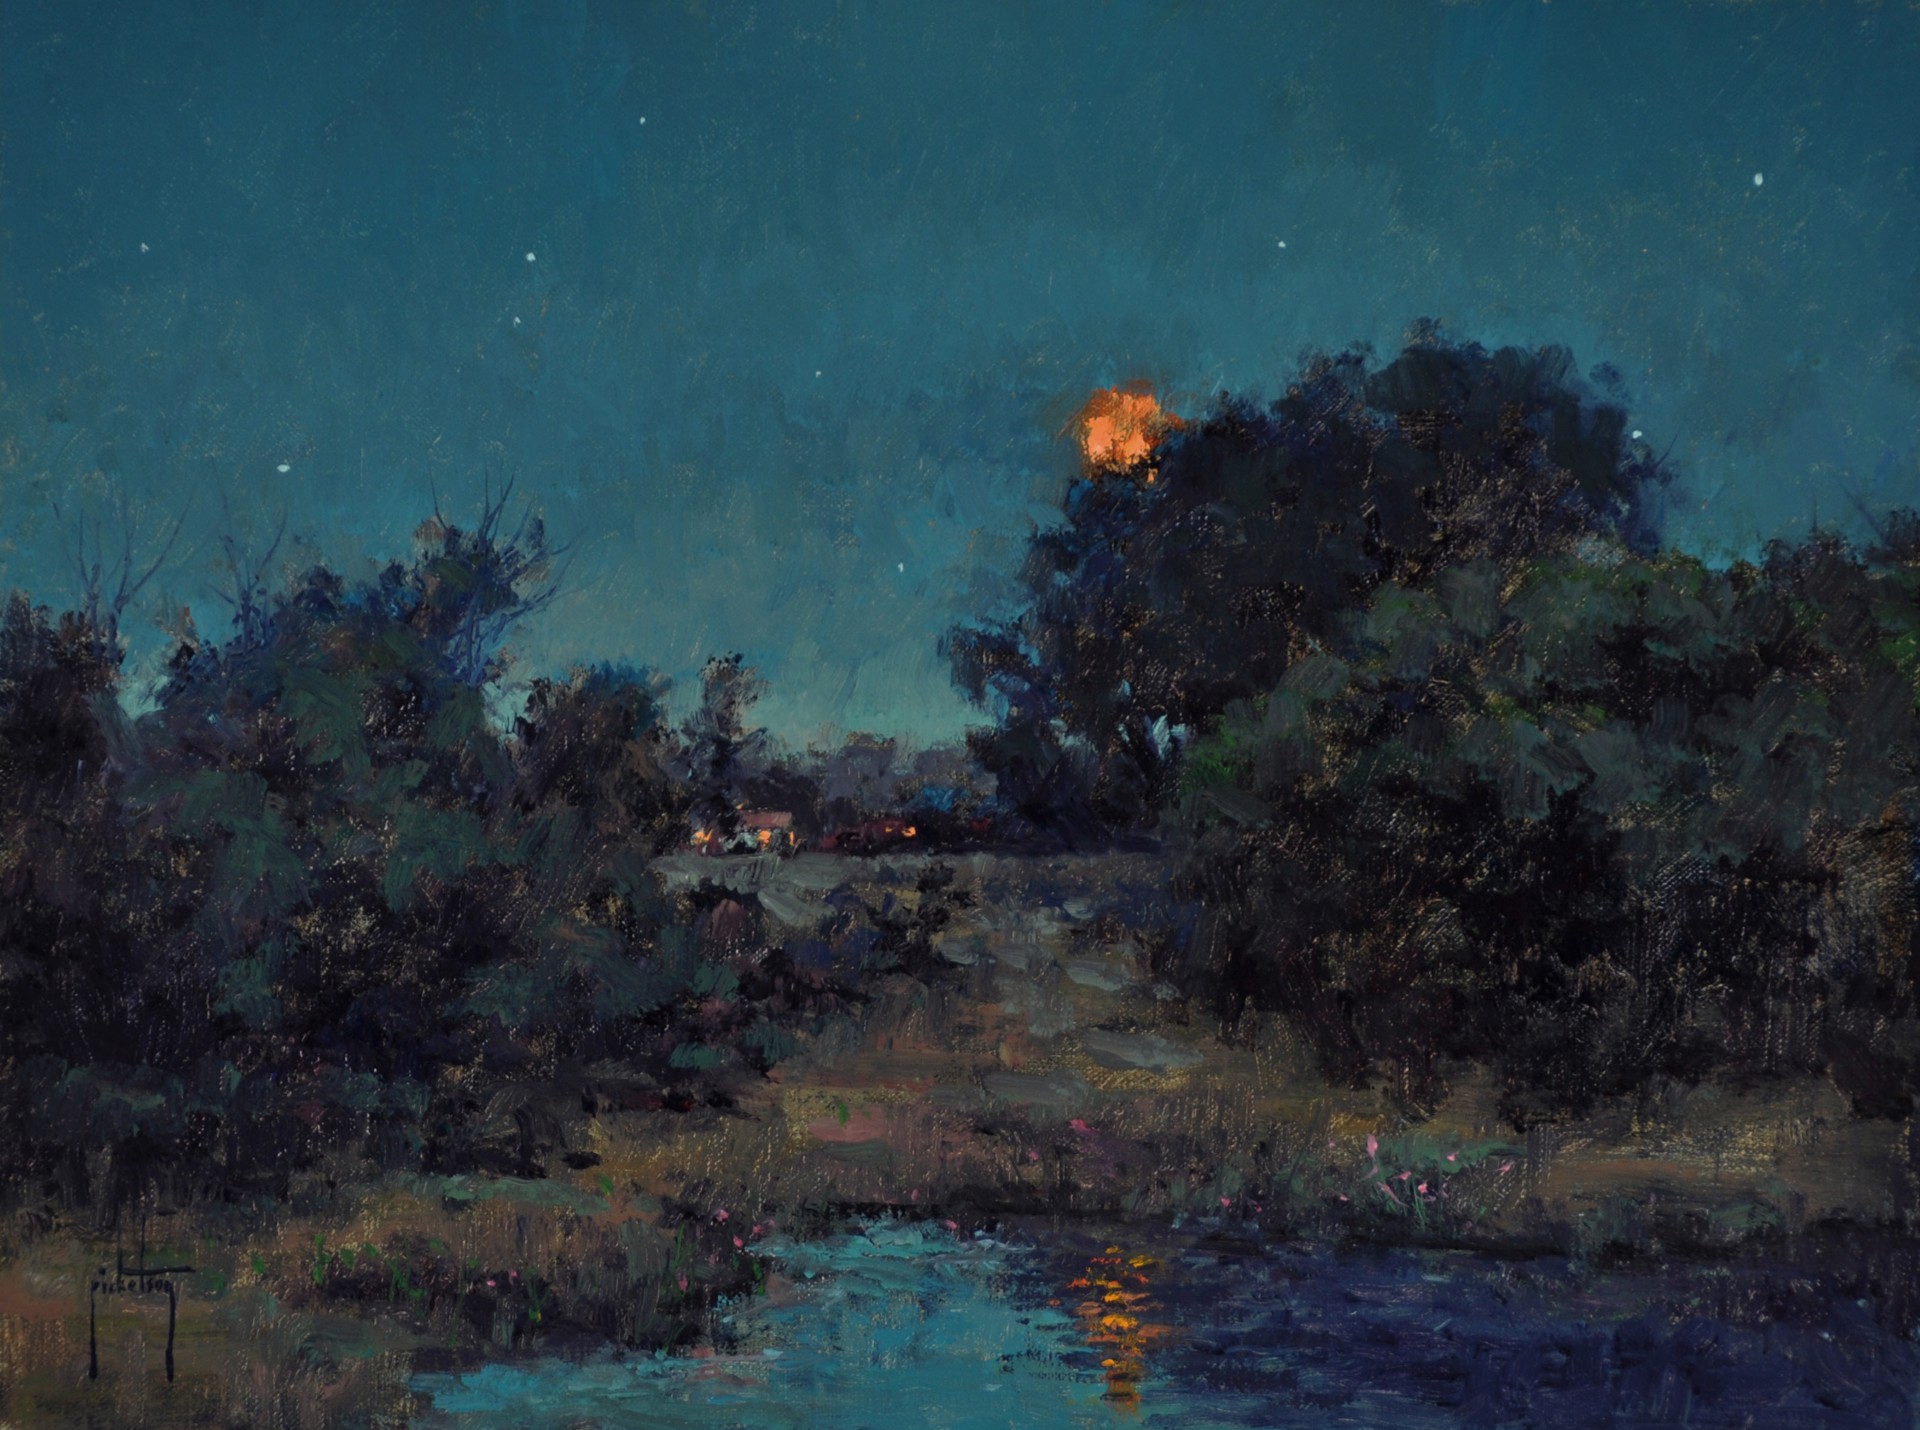 A Quiet Moon by Jerry Ricketson